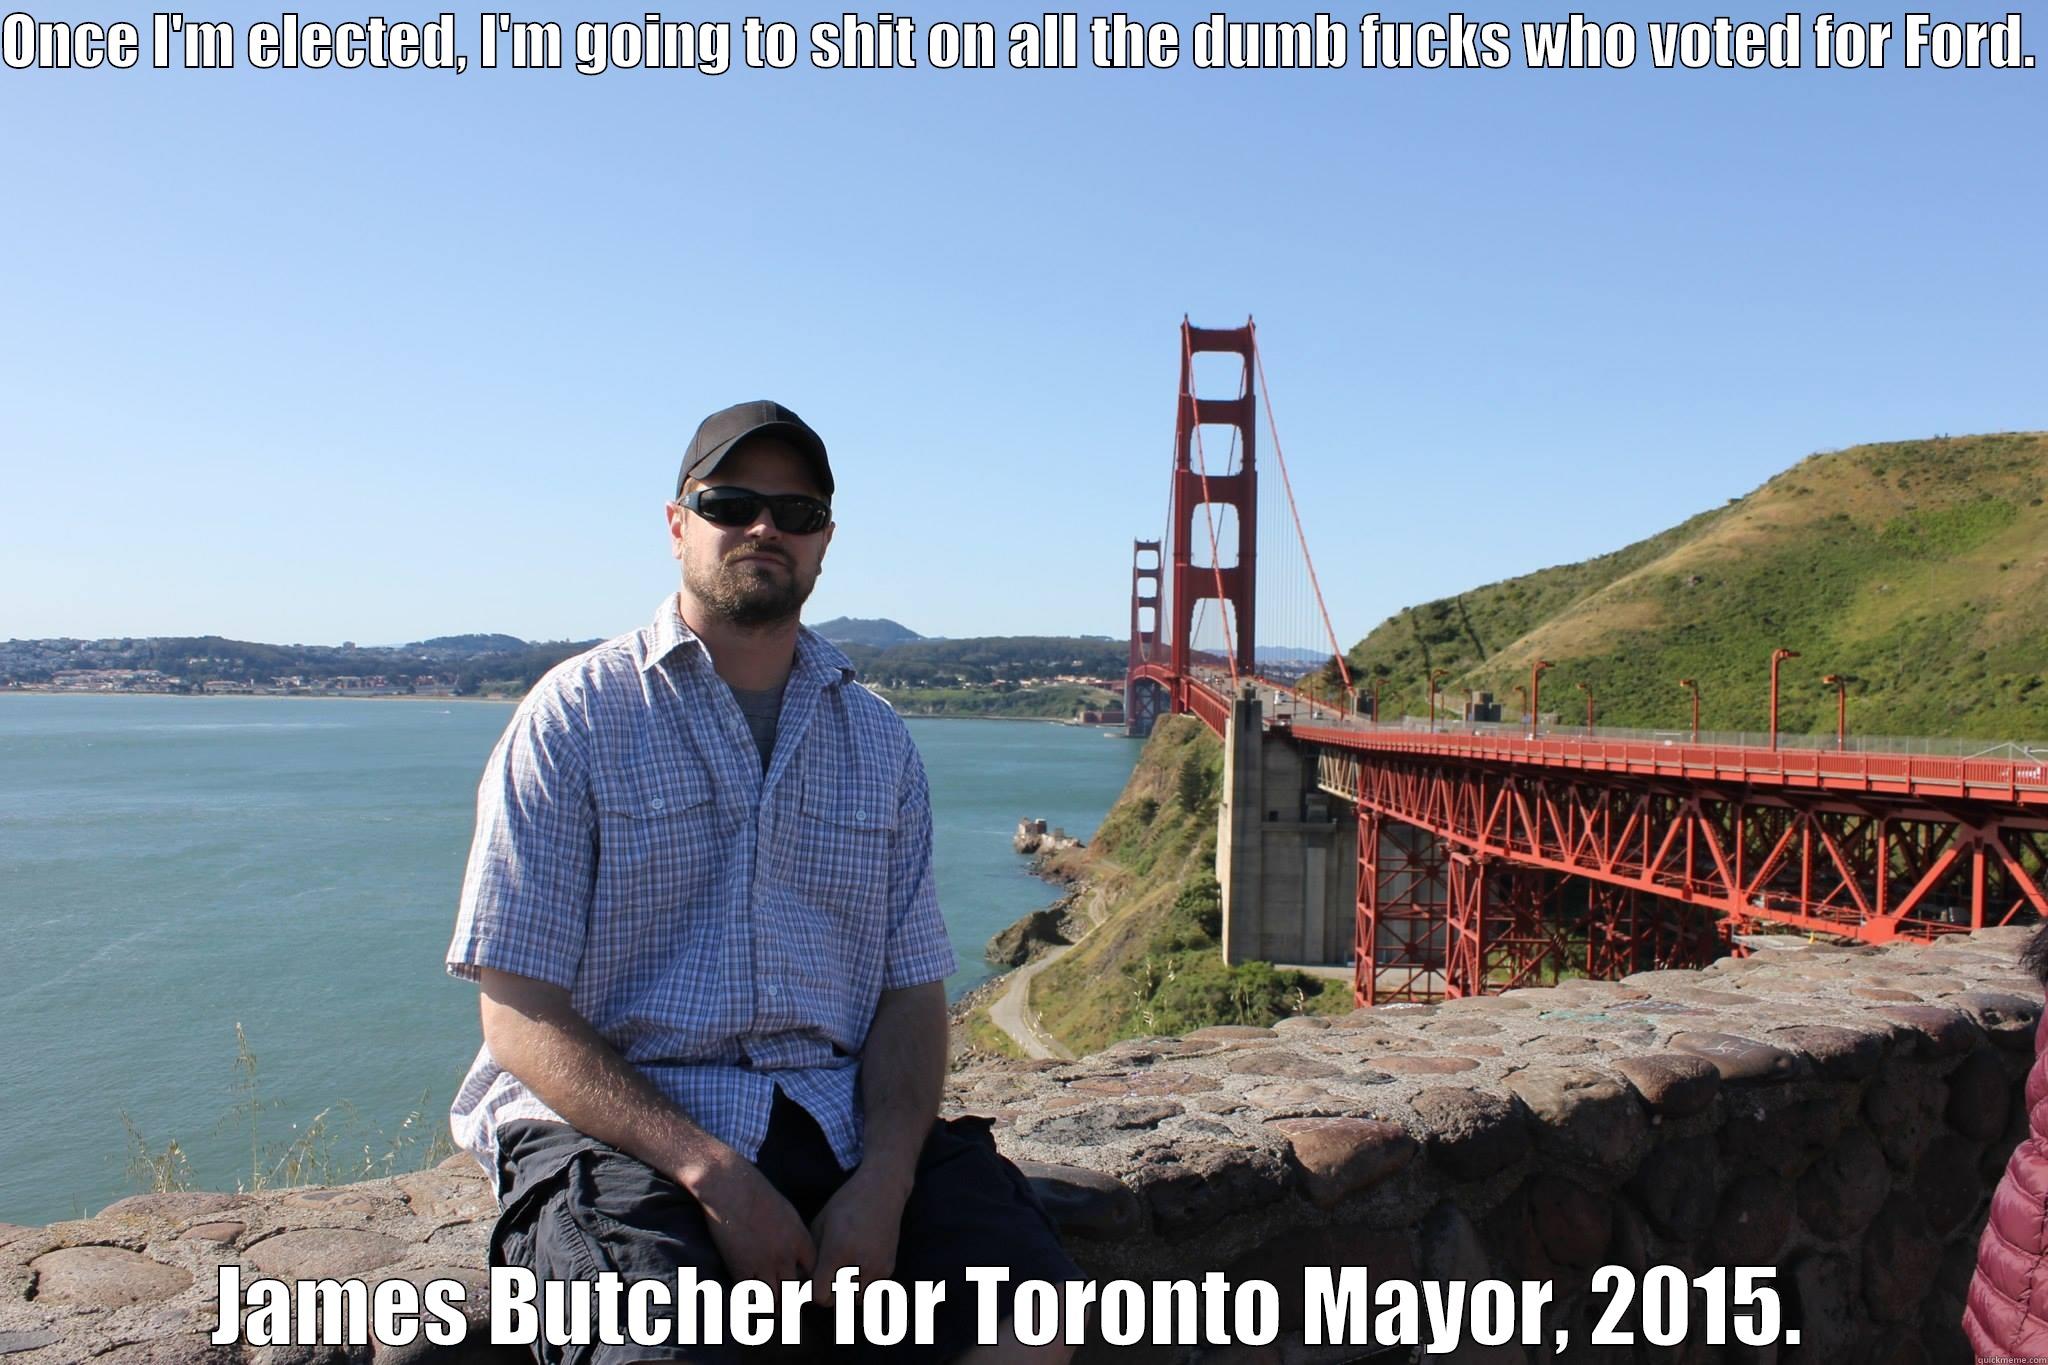 Campaign Ad.  - ONCE I'M ELECTED, I'M GOING TO SHIT ON ALL THE DUMB FUCKS WHO VOTED FOR FORD.  JAMES BUTCHER FOR TORONTO MAYOR, 2015.  Misc